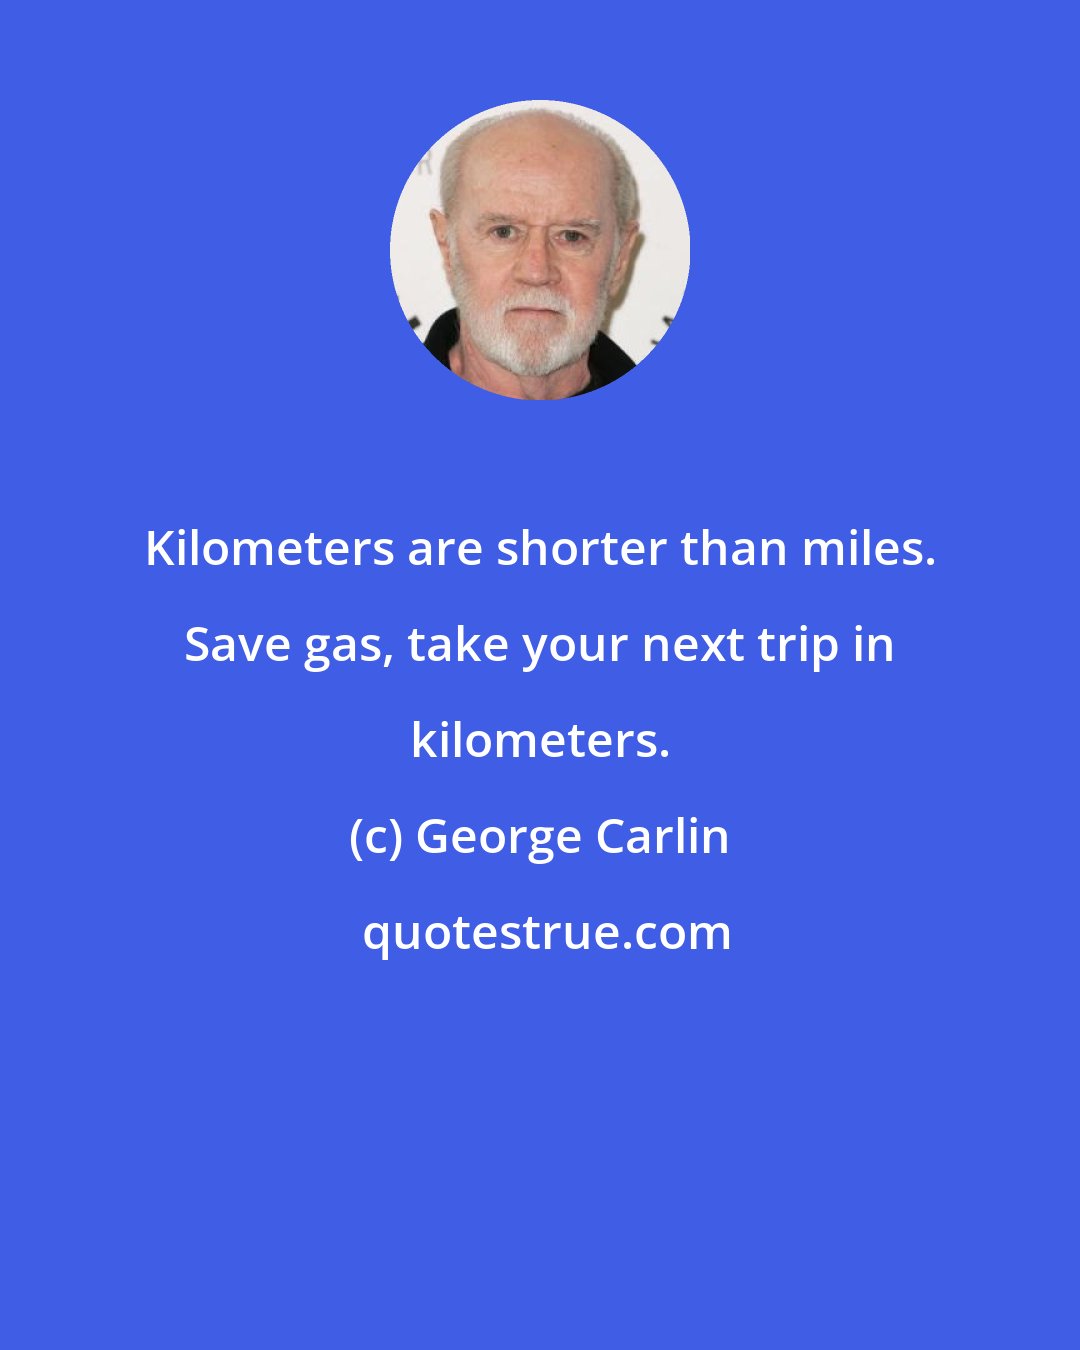 George Carlin: Kilometers are shorter than miles. Save gas, take your next trip in kilometers.